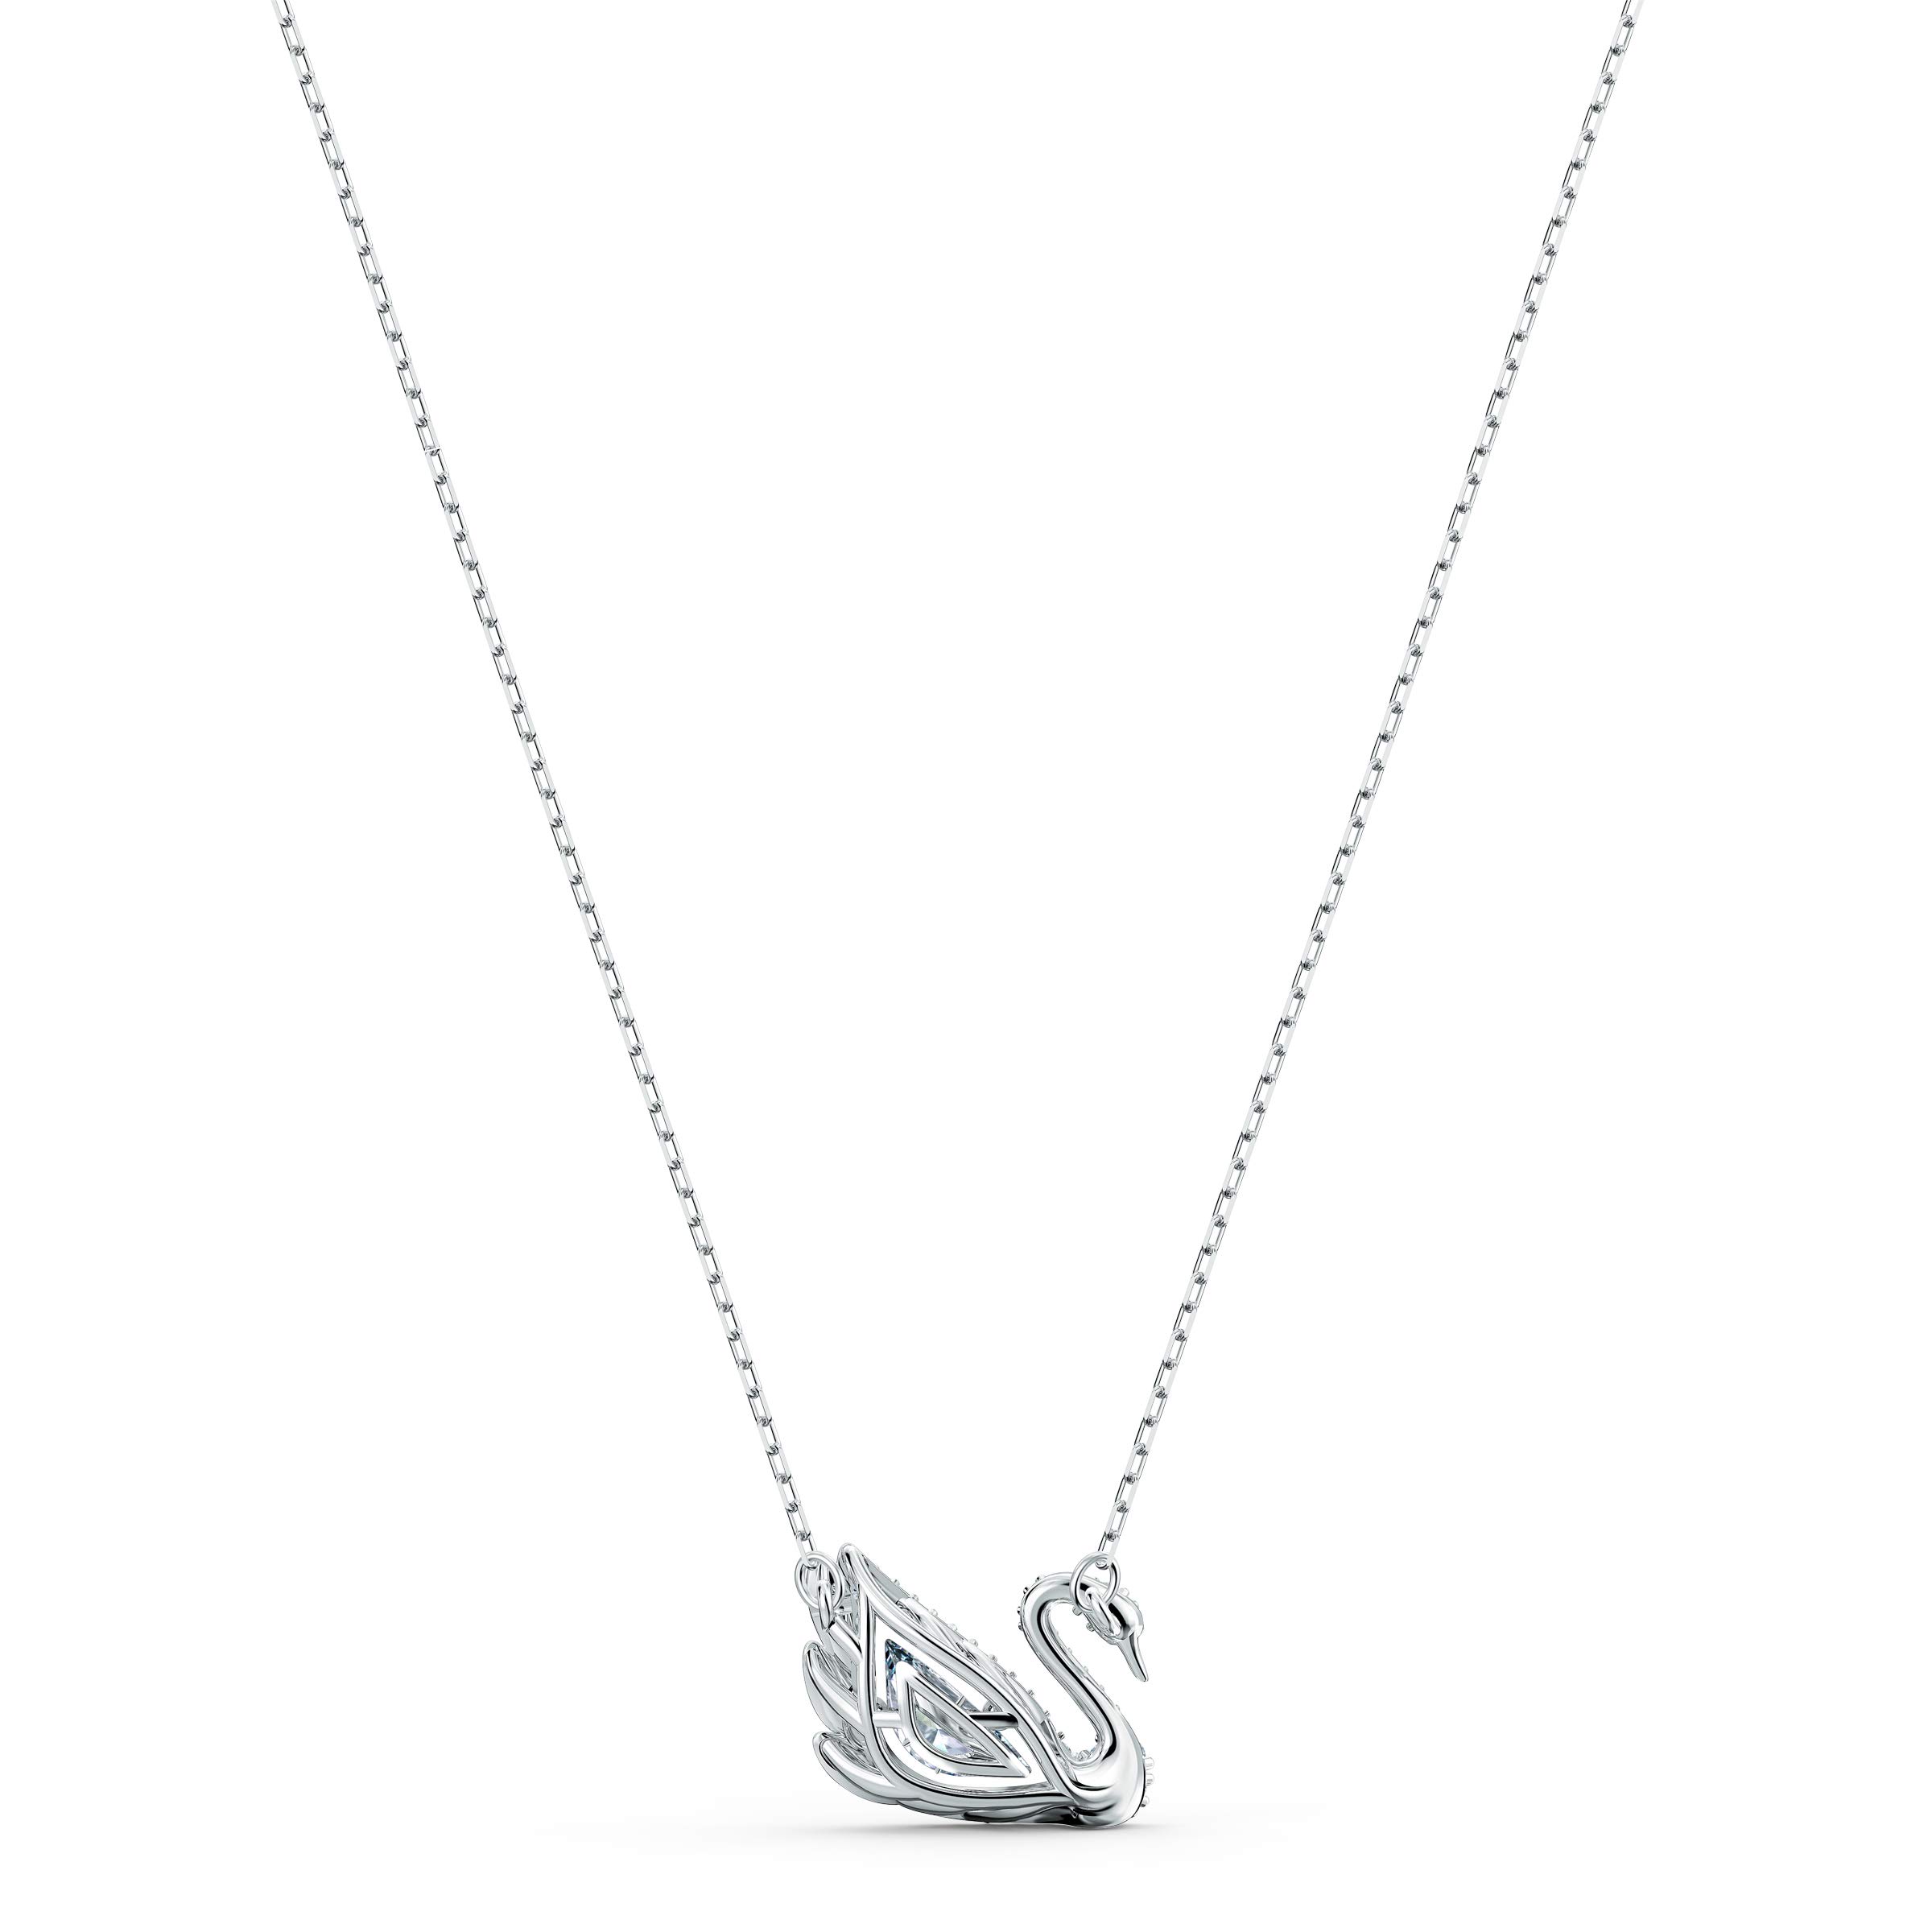 SWAROVSKI Dancing Swan Necklace Jewelry Collection, Rhodium Finish, Blue Crystals, Clear Crystals